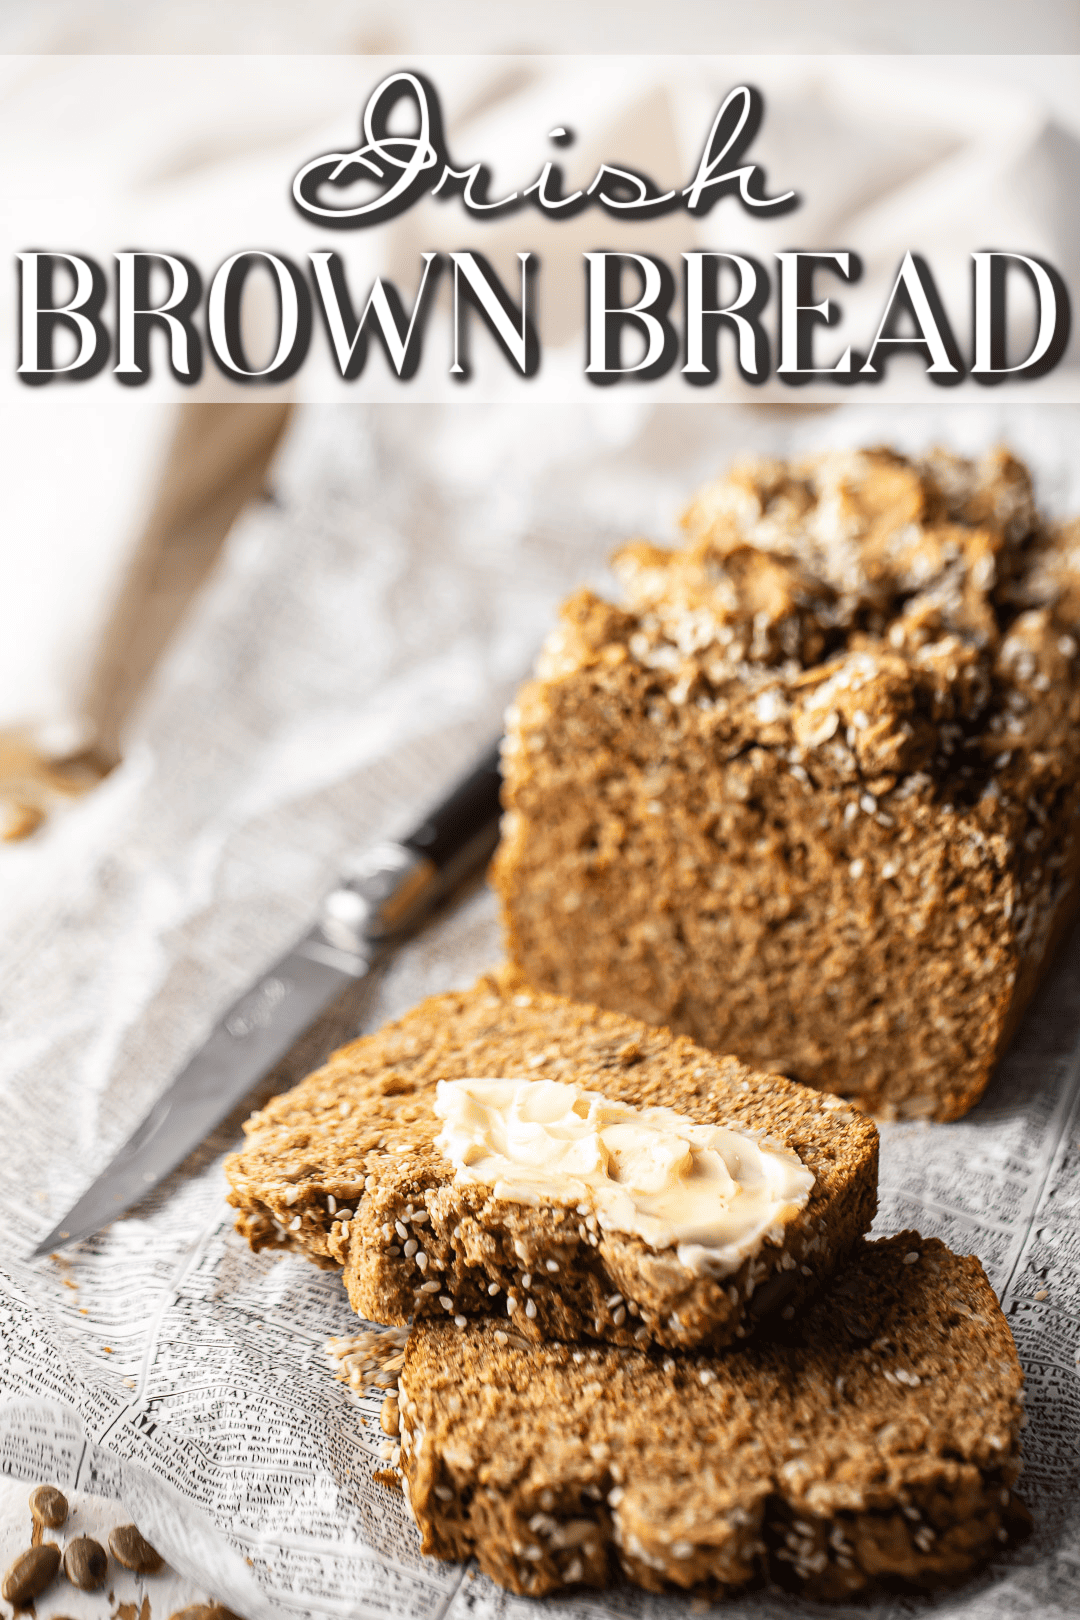 Irish brown bread recipe, baked, sliced, and buttered thickly.